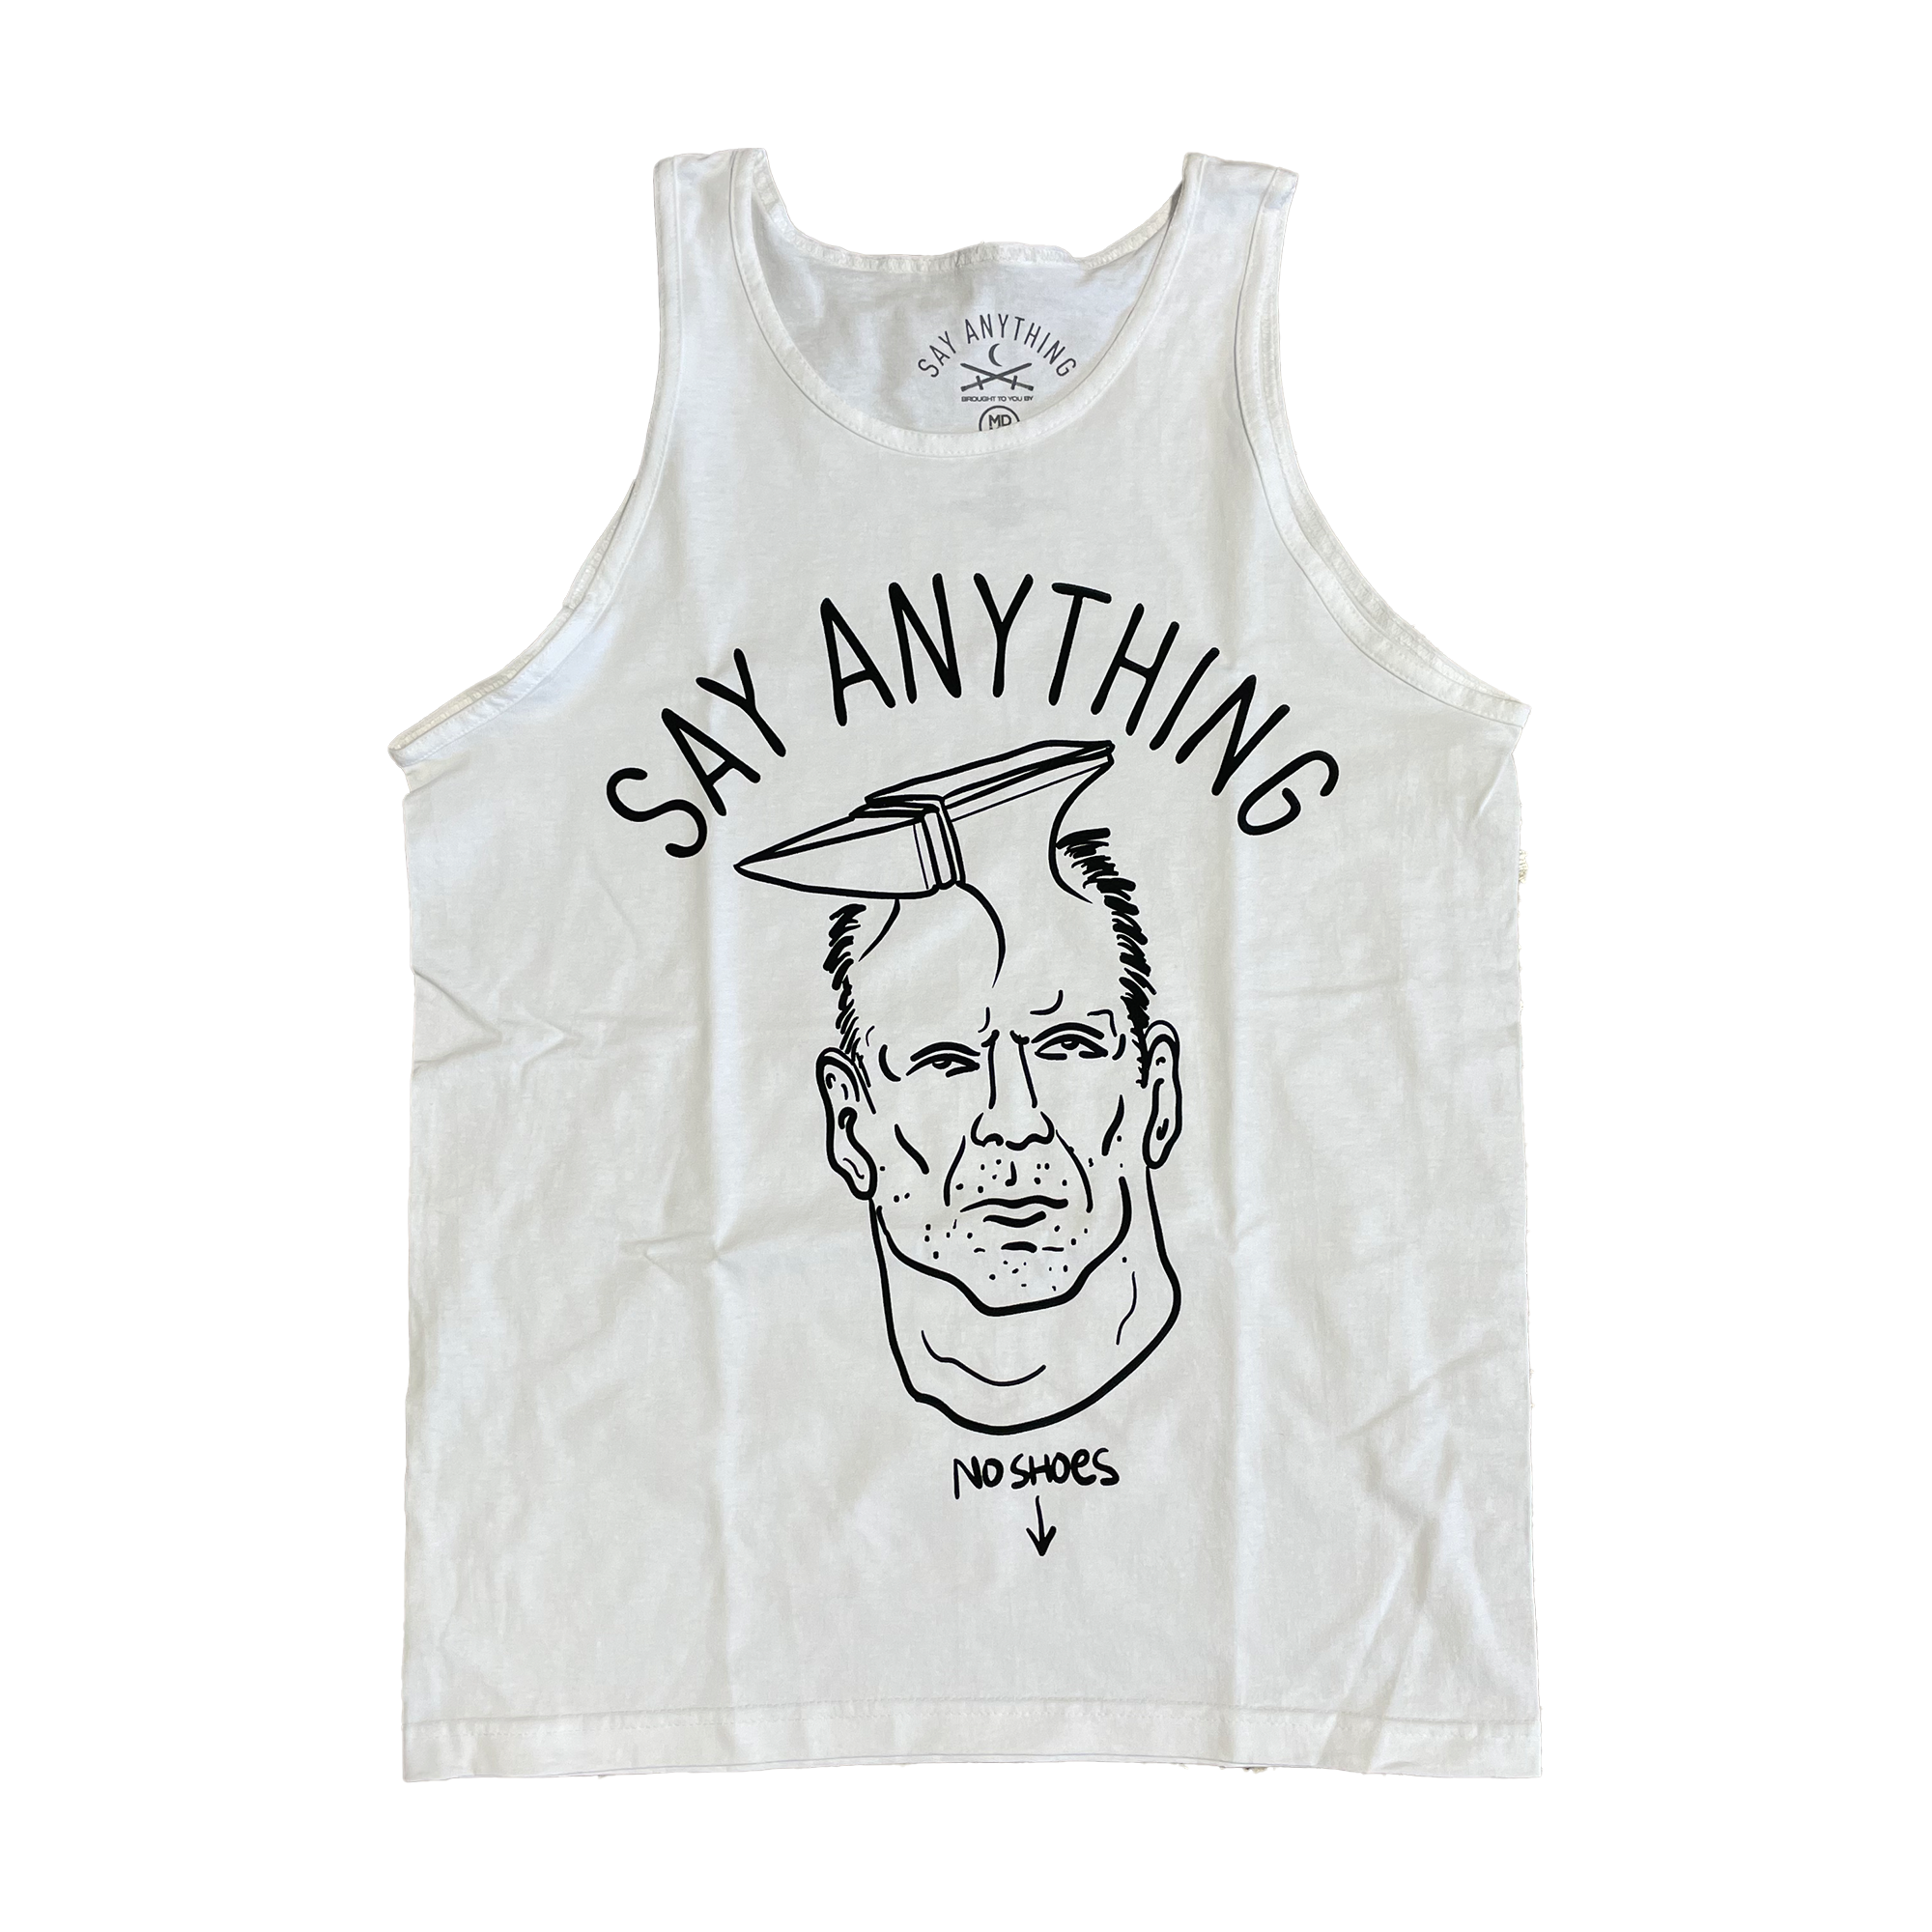 Say Anything - White Bruce Tank Top